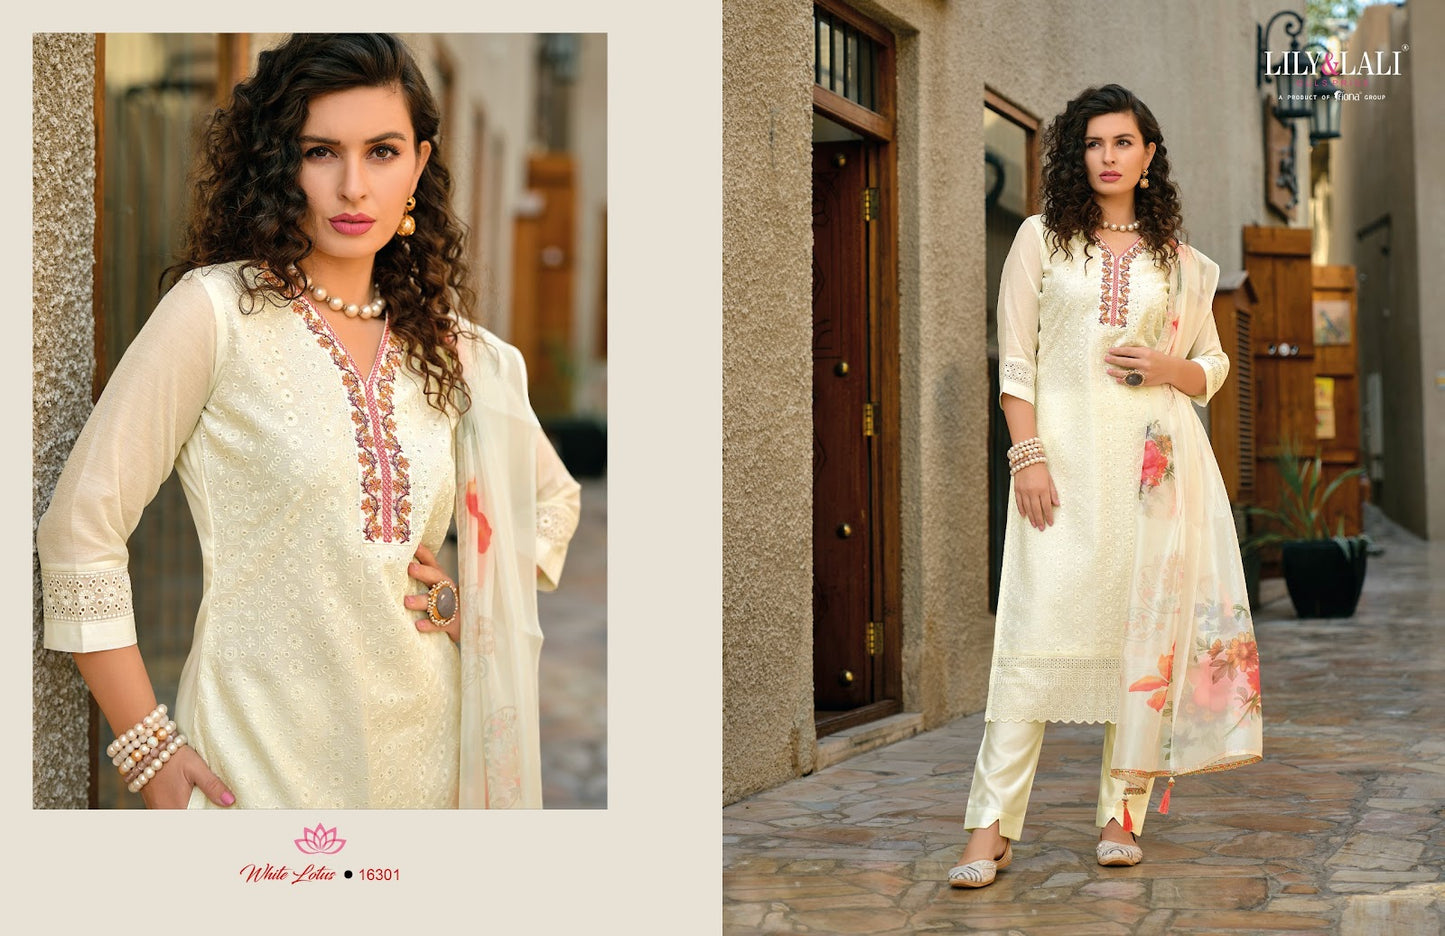 White Lotus Lily Lali Chanderi Silk Readymade Pant Style Suits